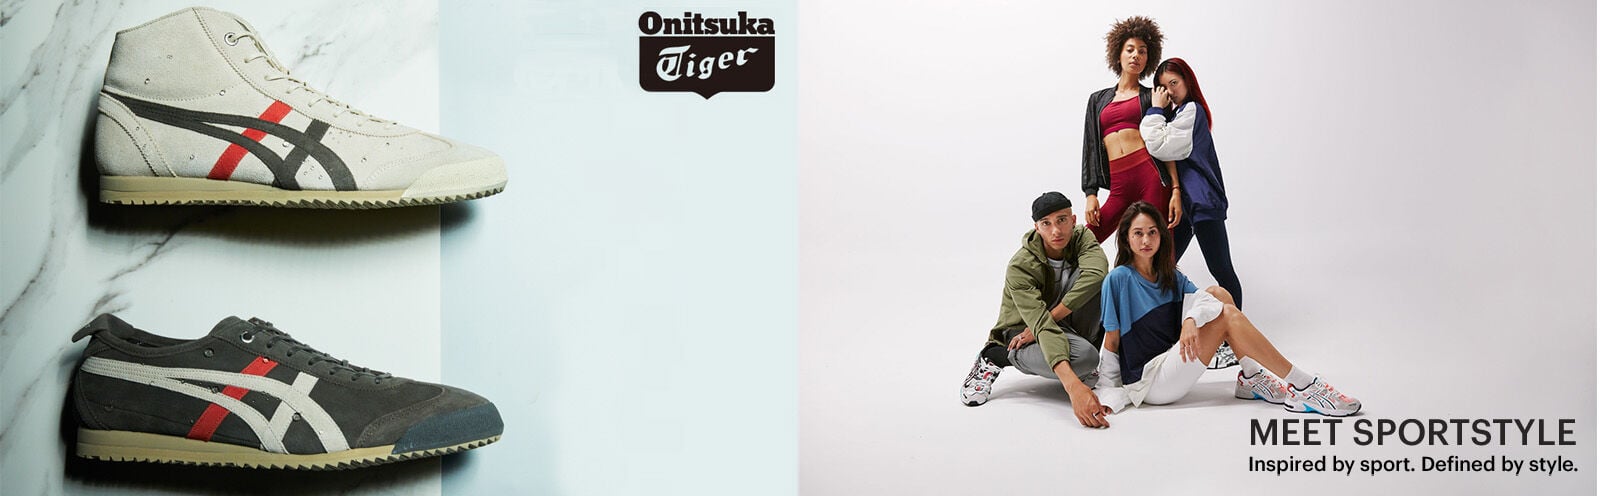 Are you looking for Onitsuka Tiger or Asics Tiger? | ASICS